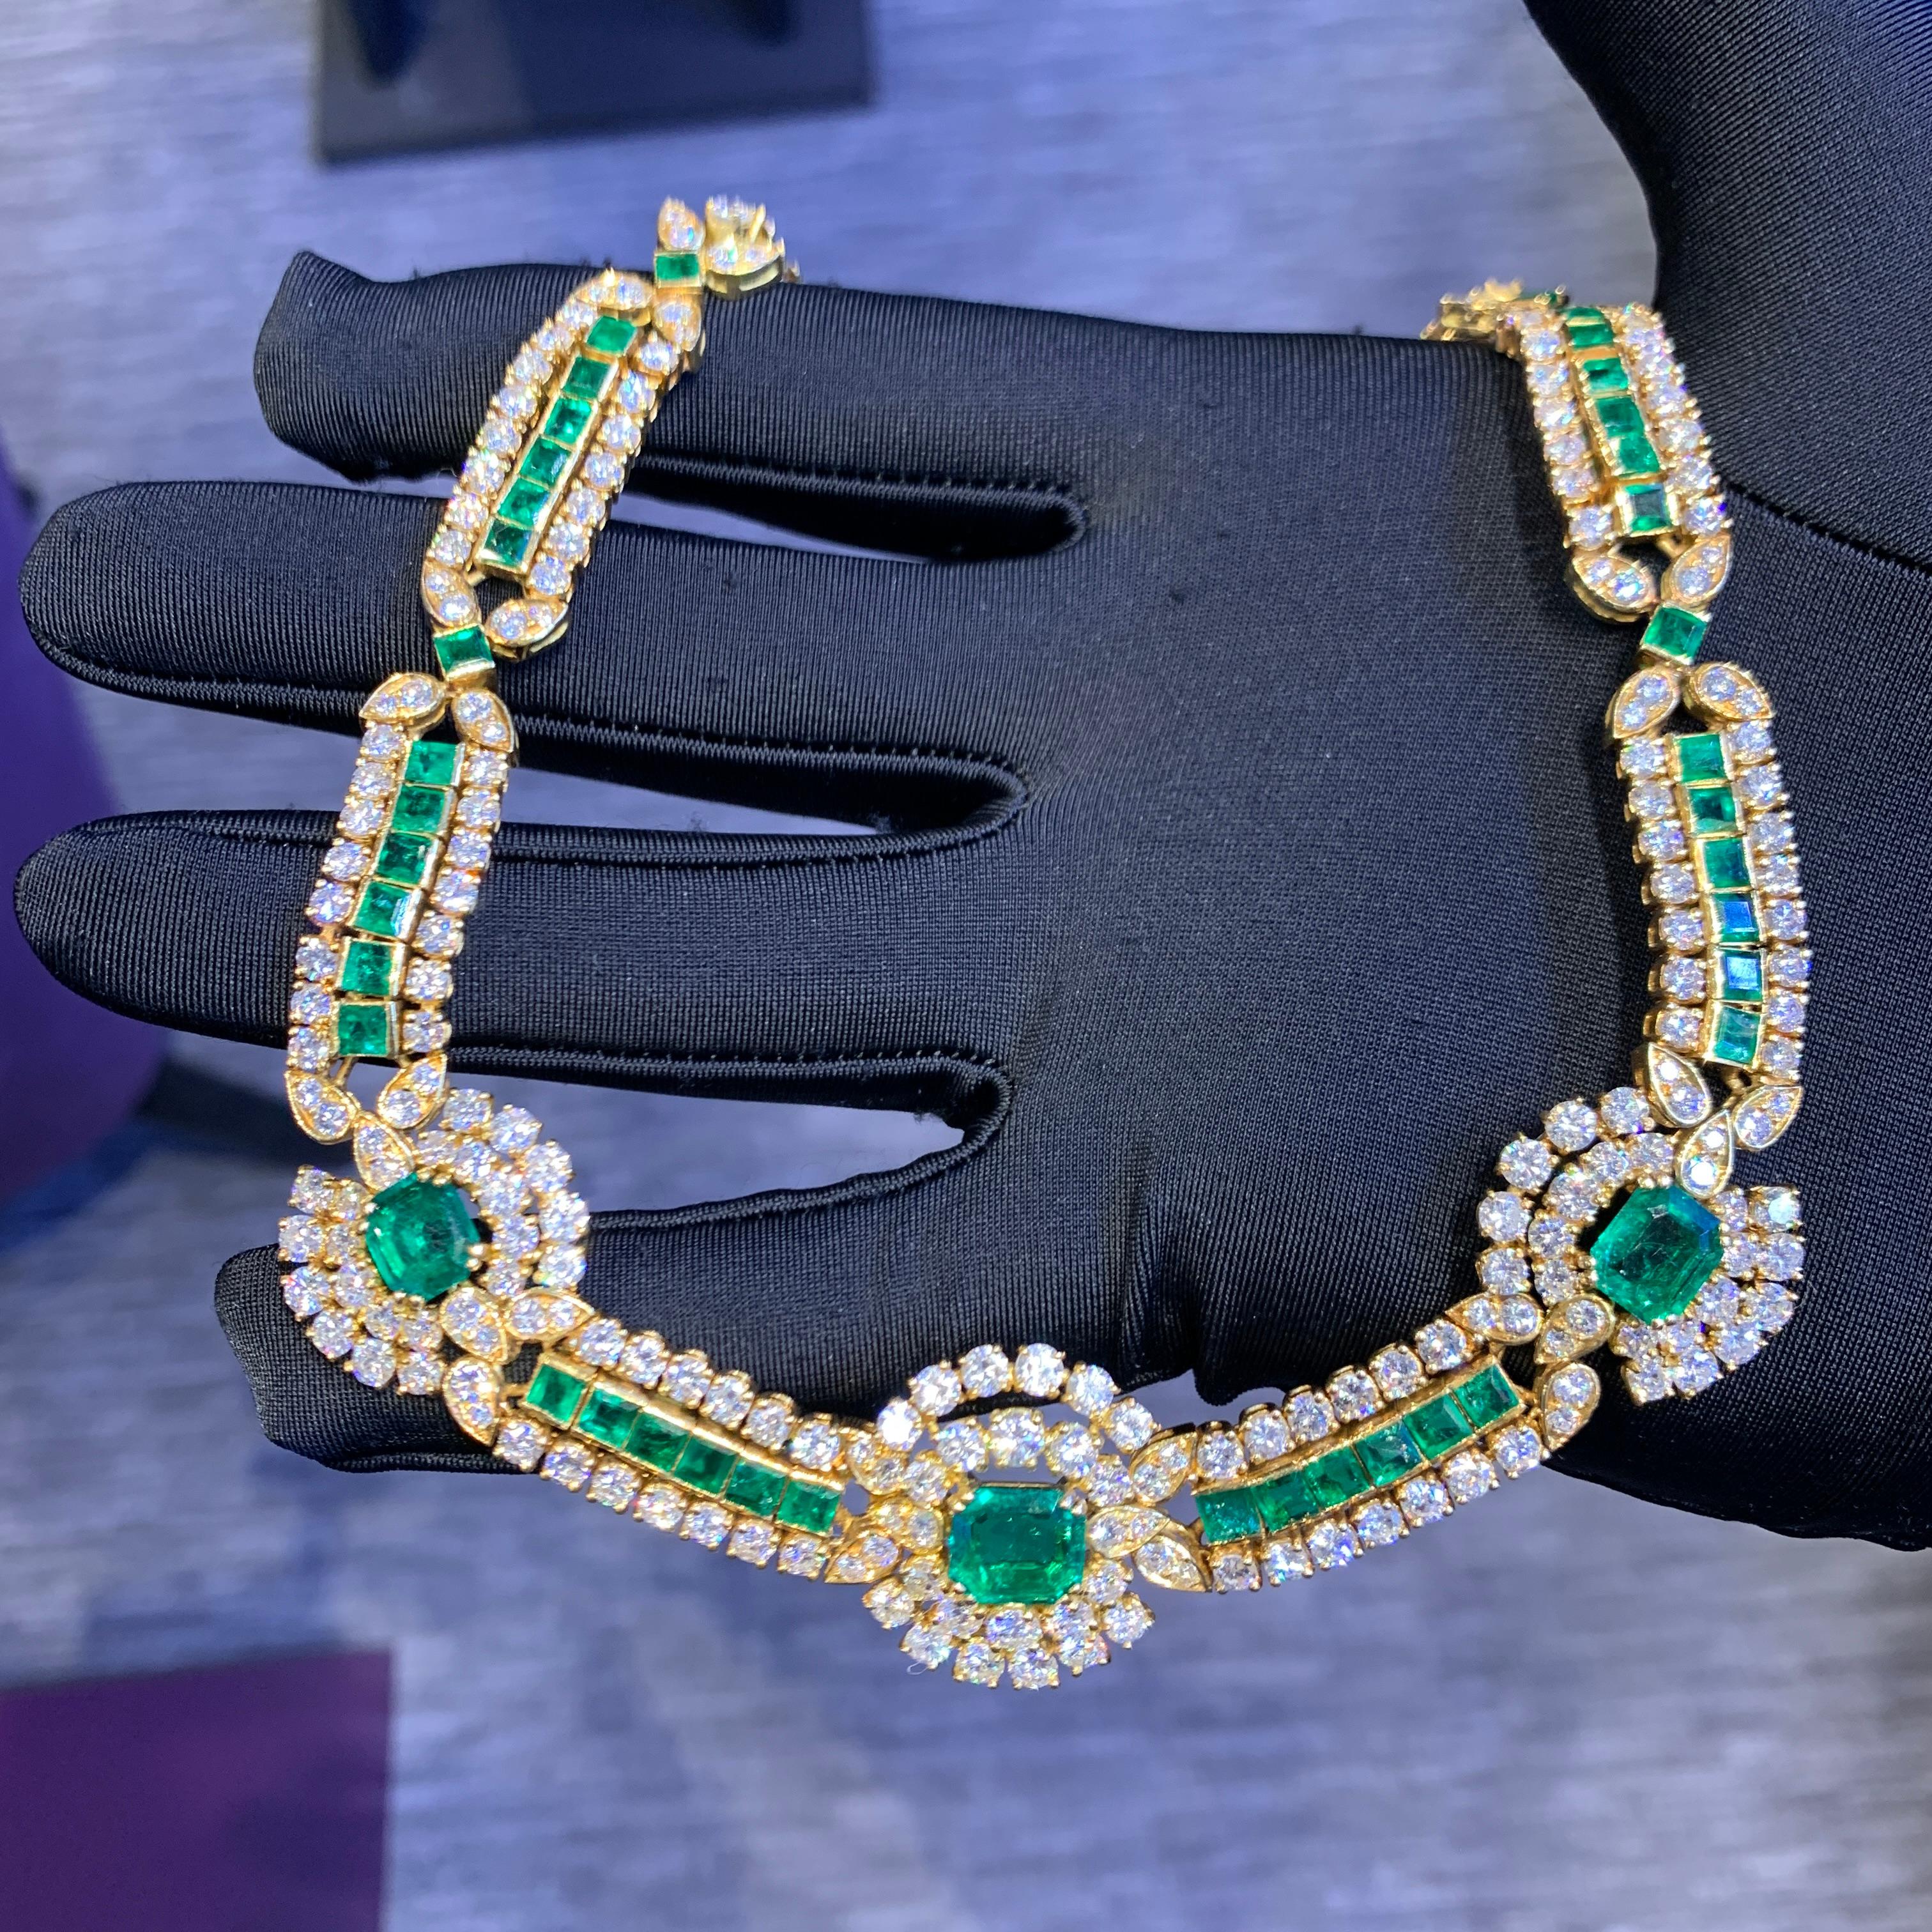 Van Cleef & Arpels Diamond & Emerald Necklace In Excellent Condition For Sale In New York, NY